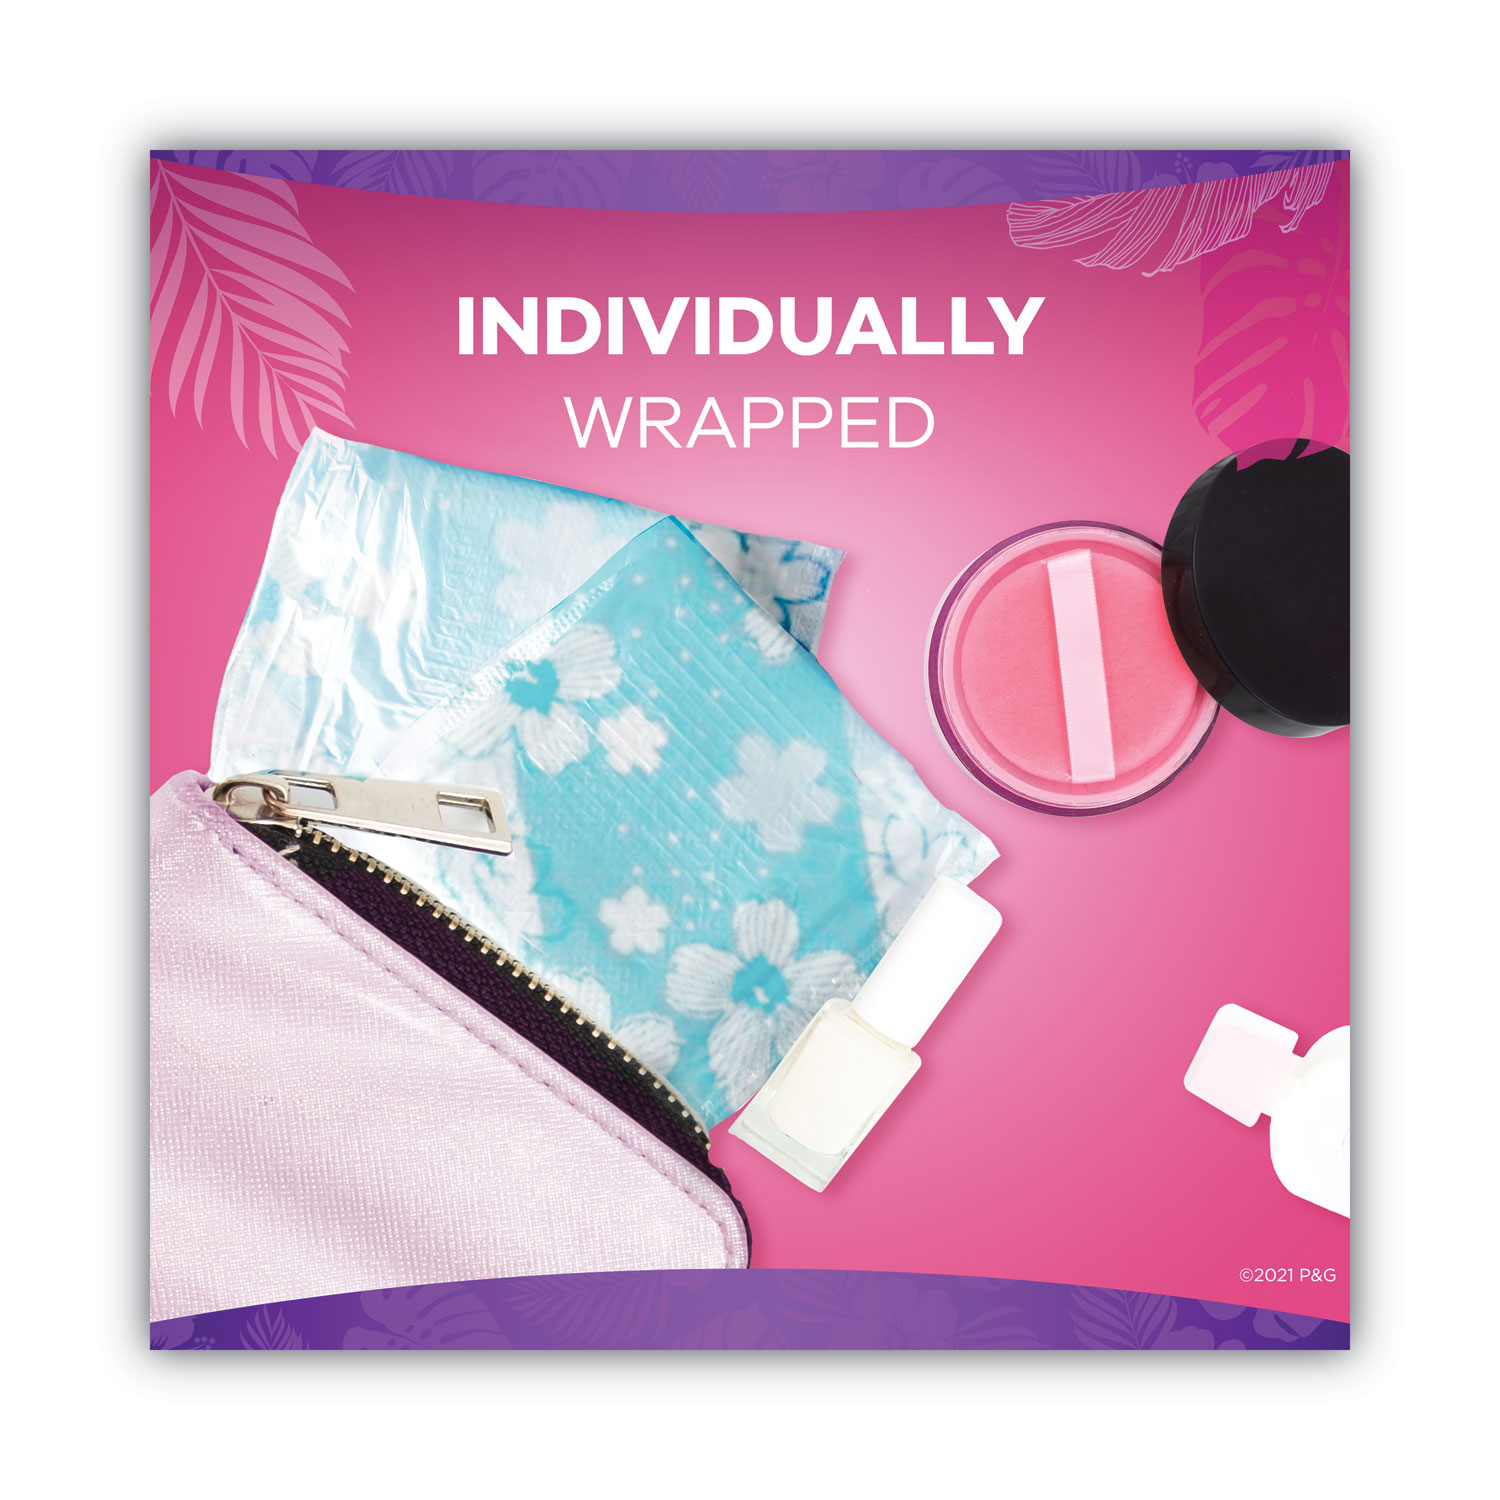 Always® Thin Daily Panty Liners, 60/Pack, 12 Pack/Carton